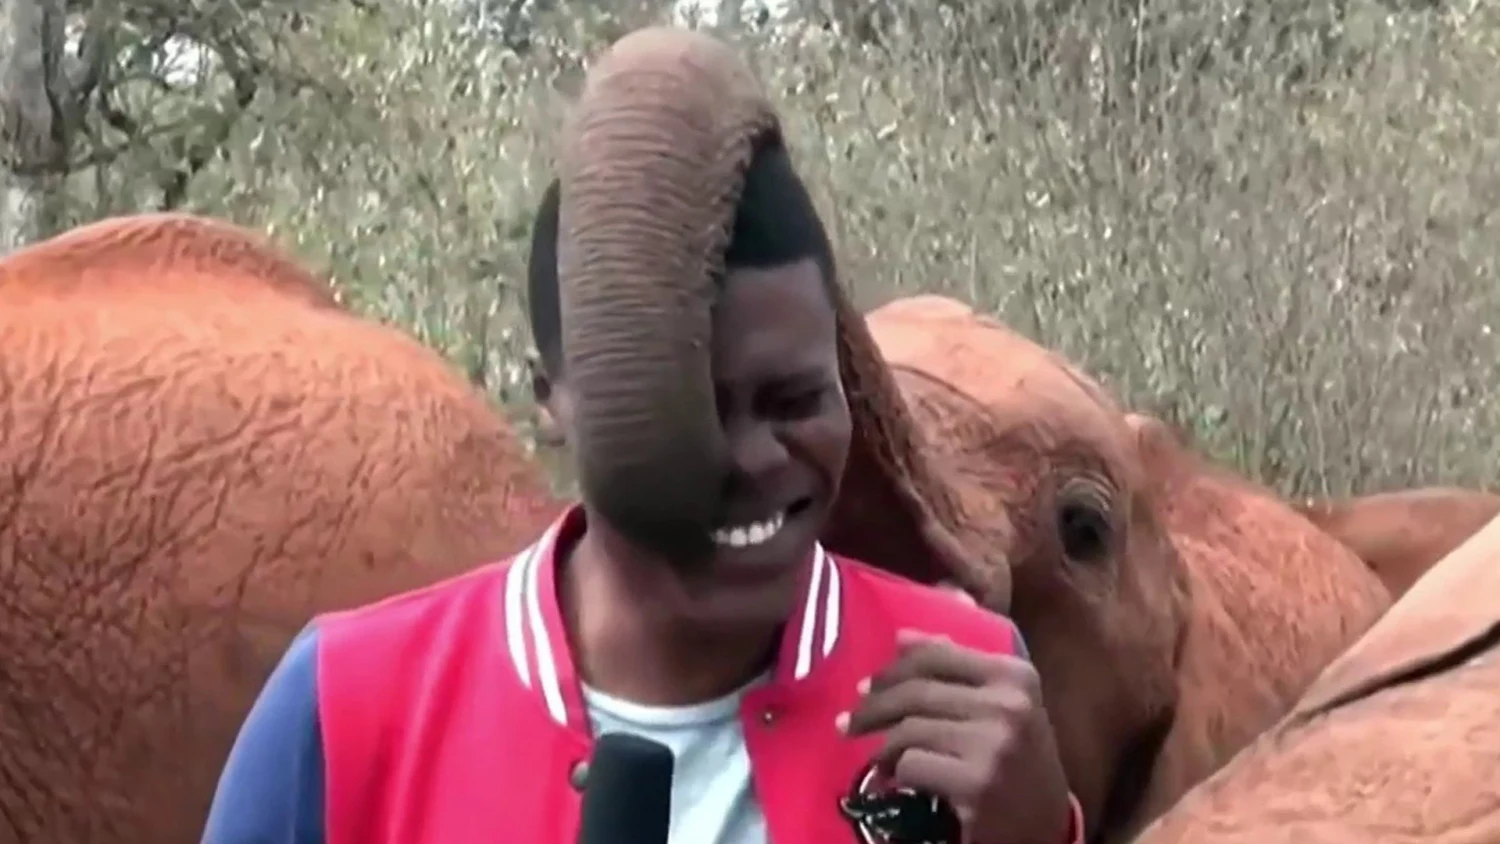 The heartwarming moment between a reporter and an elephant.